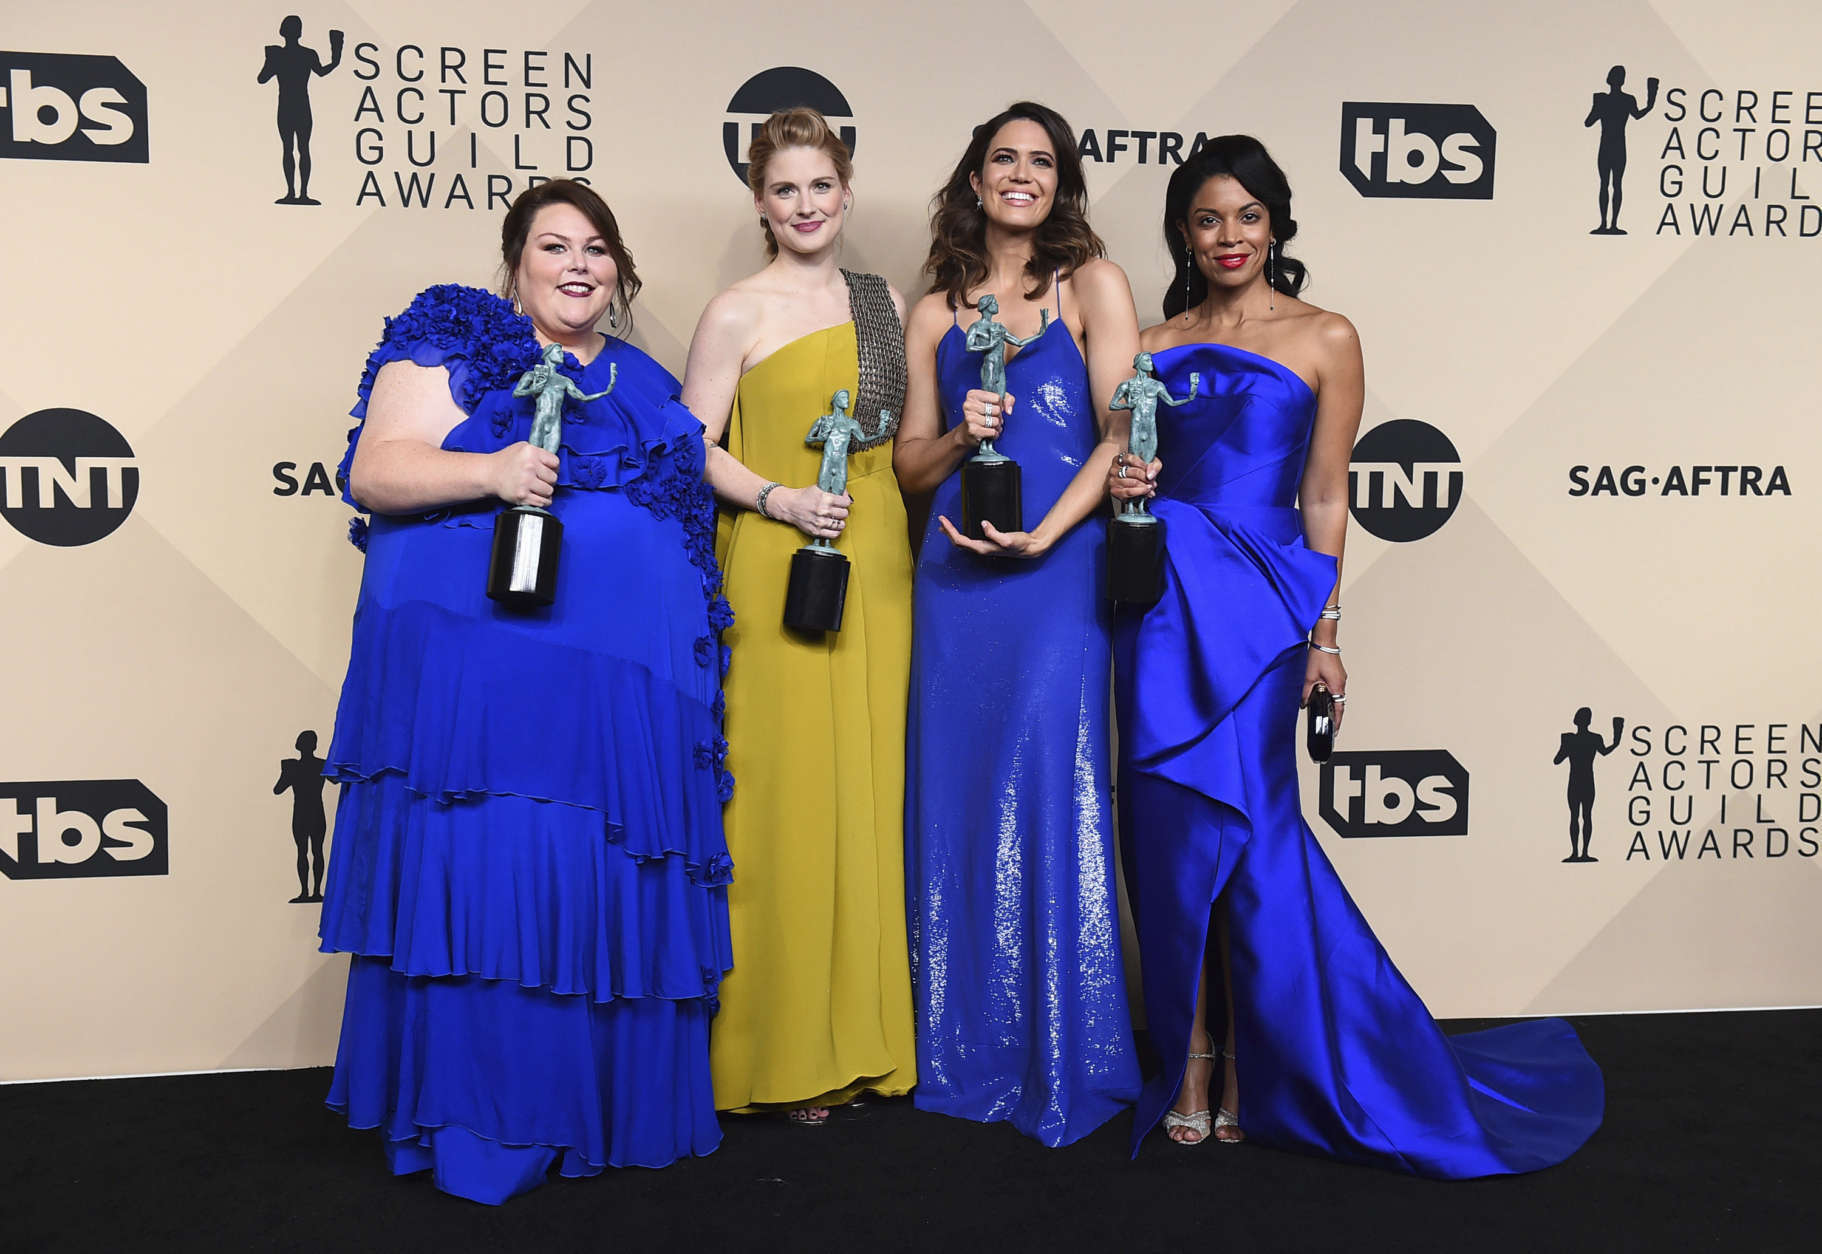 Chrissy Metz, from left, Alexandra Breckenridge, Mandy Moore, and Susan Kelechi Watson pose in the press room with their awards for outstanding performance by an ensemble in a drama series for "This Is Us" at the 24th annual Screen Actors Guild Awards at the Shrine Auditorium &amp; Expo Hall on Sunday, Jan. 21, 2018, in Los Angeles. (Photo by Jordan Strauss/Invision/AP)